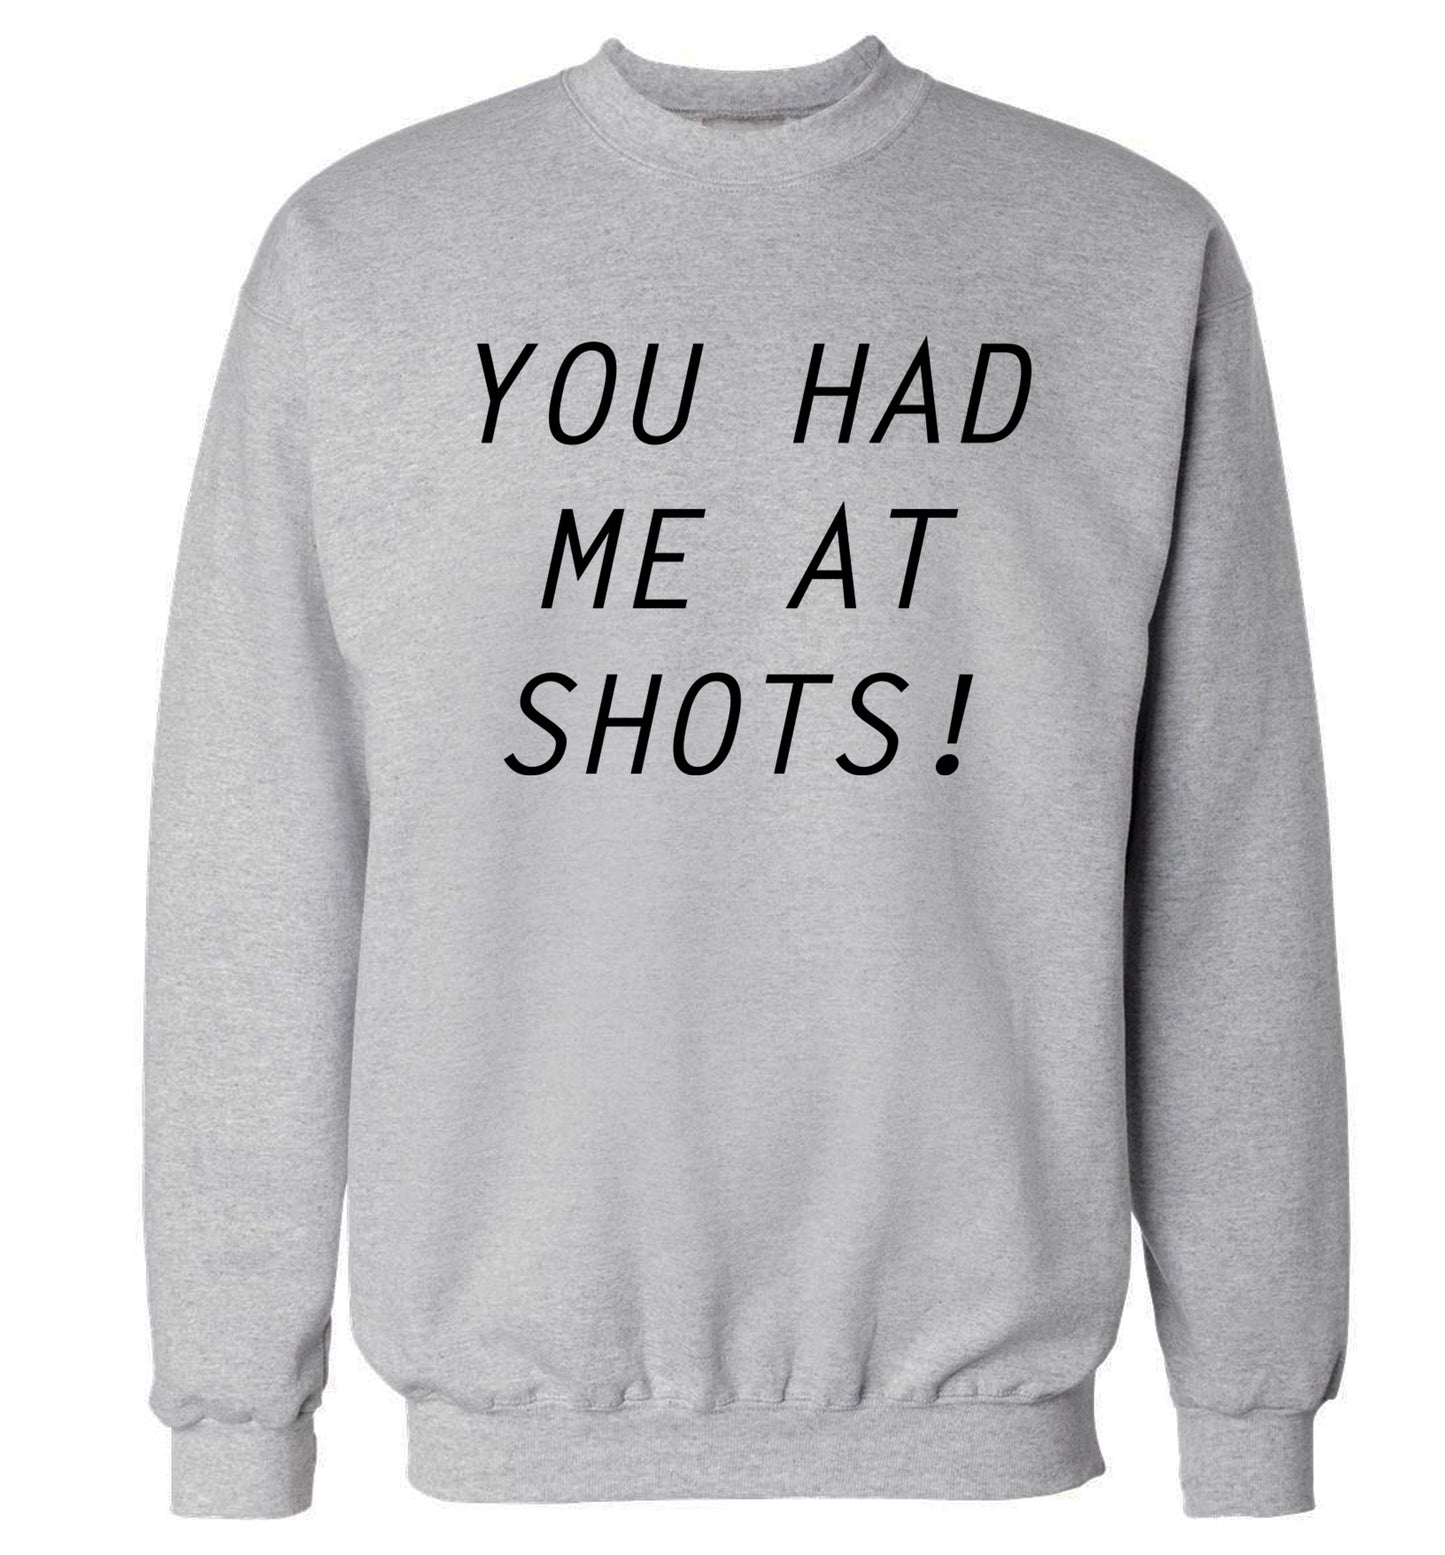 You had me at shots Adult's unisex grey Sweater 2XL